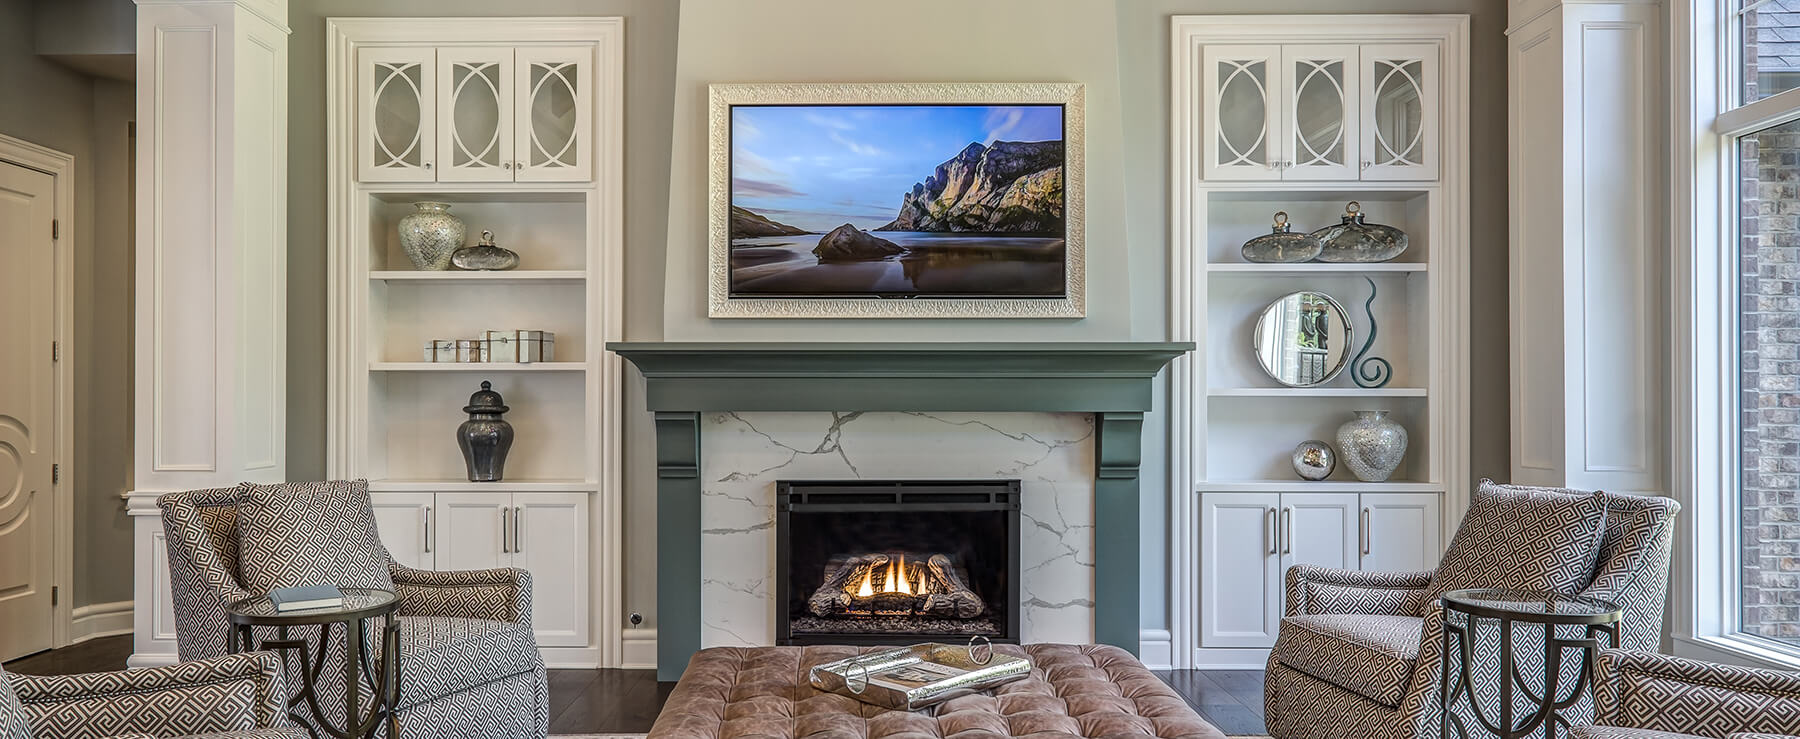 A green painted fireplace mantel surrounded by white painted bookcases and entertainment center cabinets.